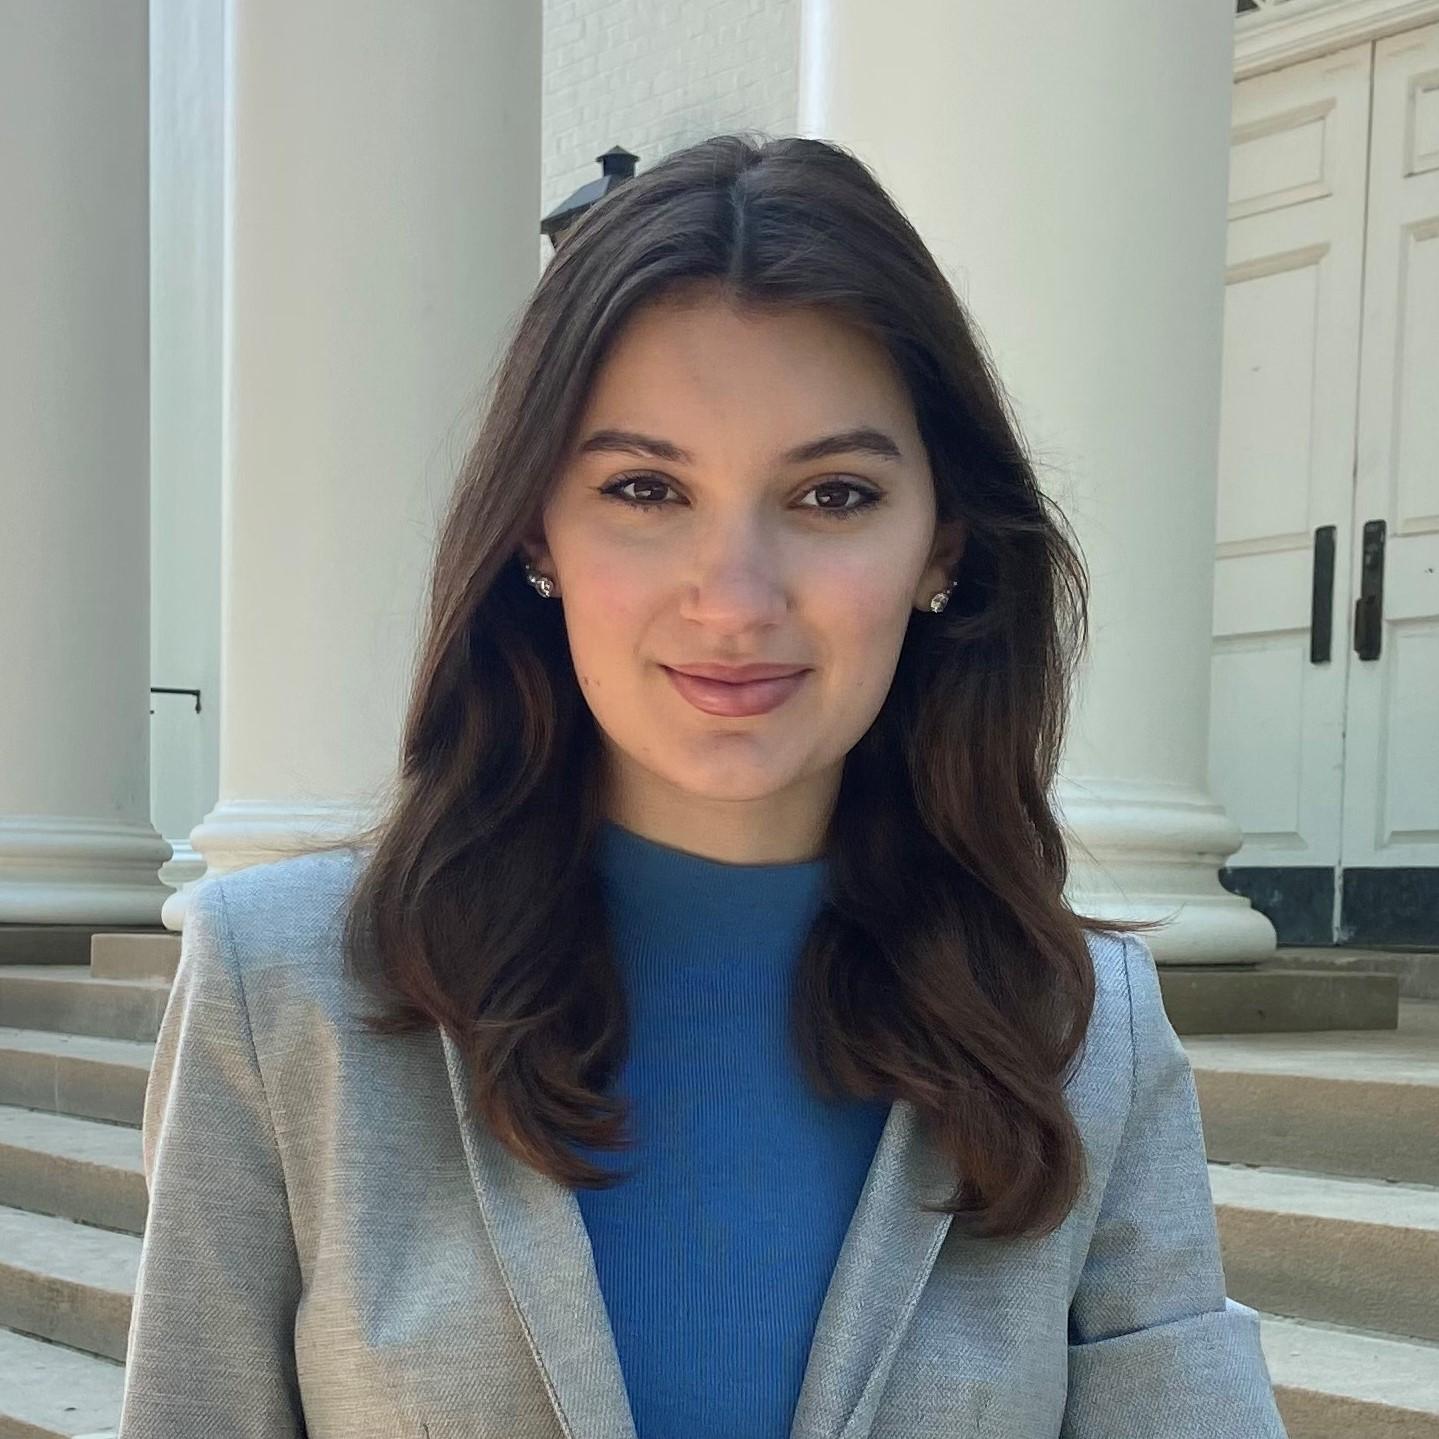 Maria is wearing a blue top and grey blazer, posing in front of pillars on campus